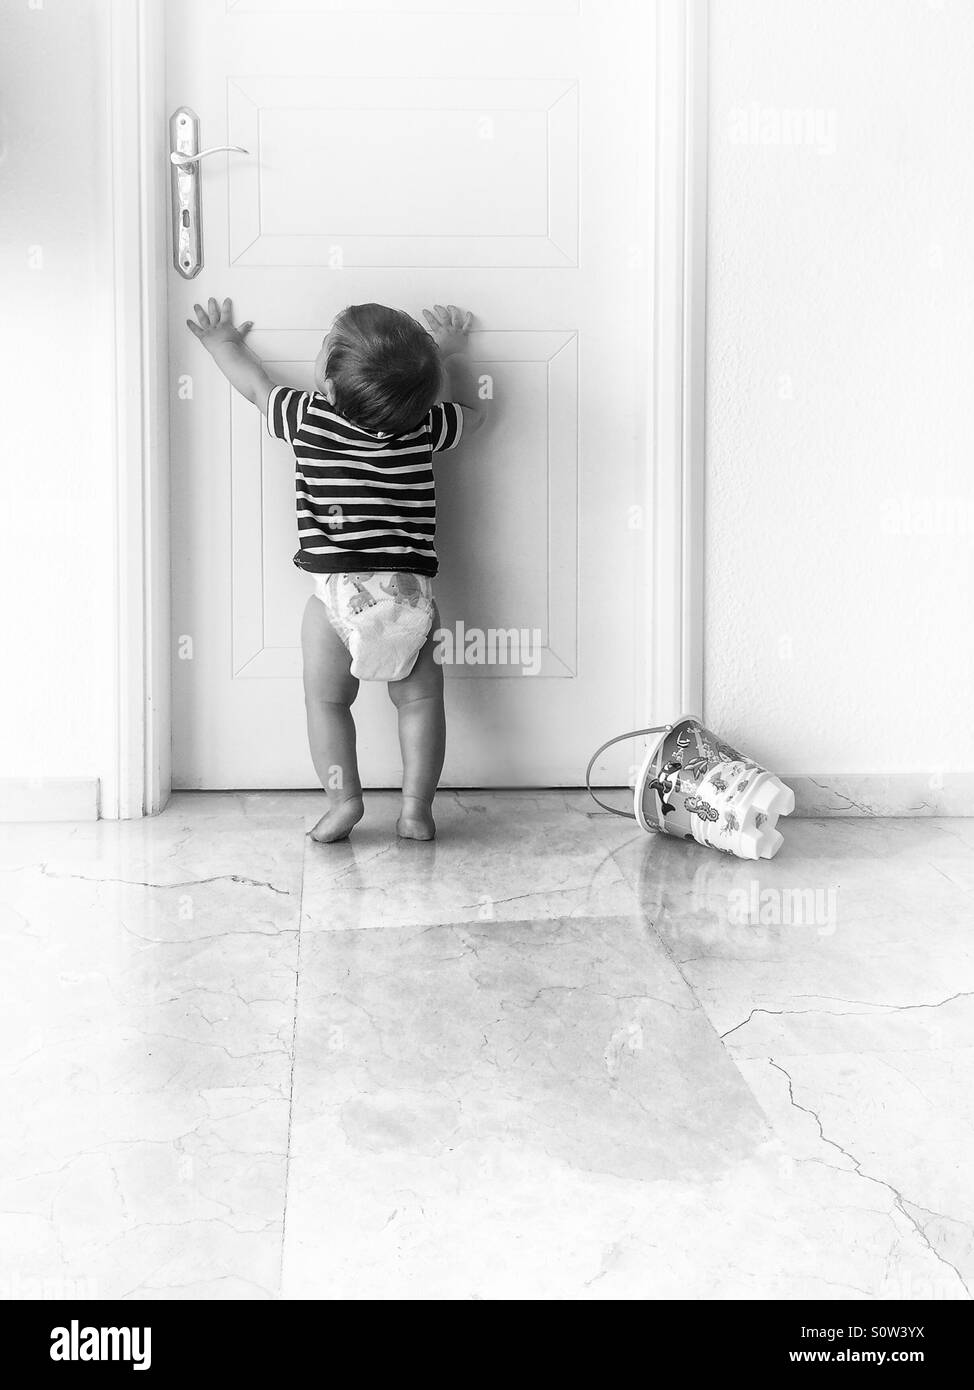 Baby reaching up Black and White Stock Photos & Images - Alamy